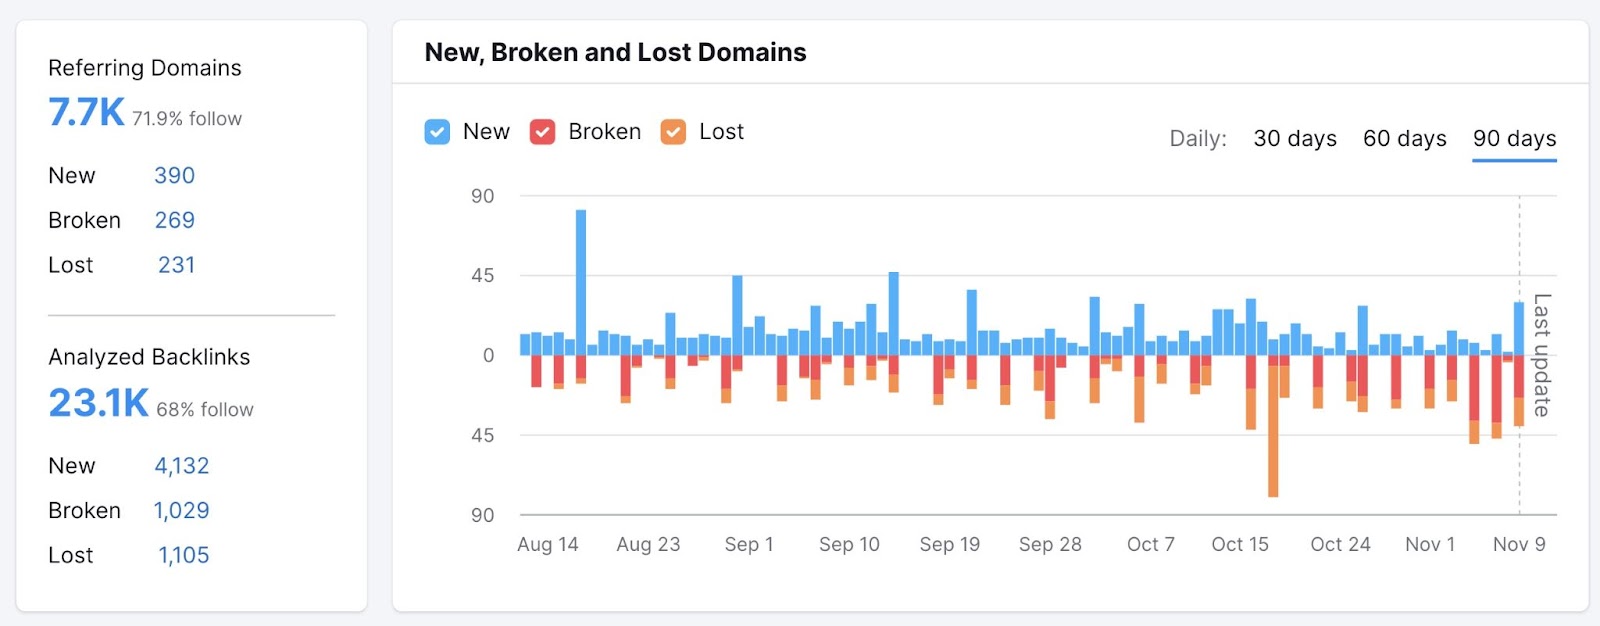 a report showing new, broken, and lost domains